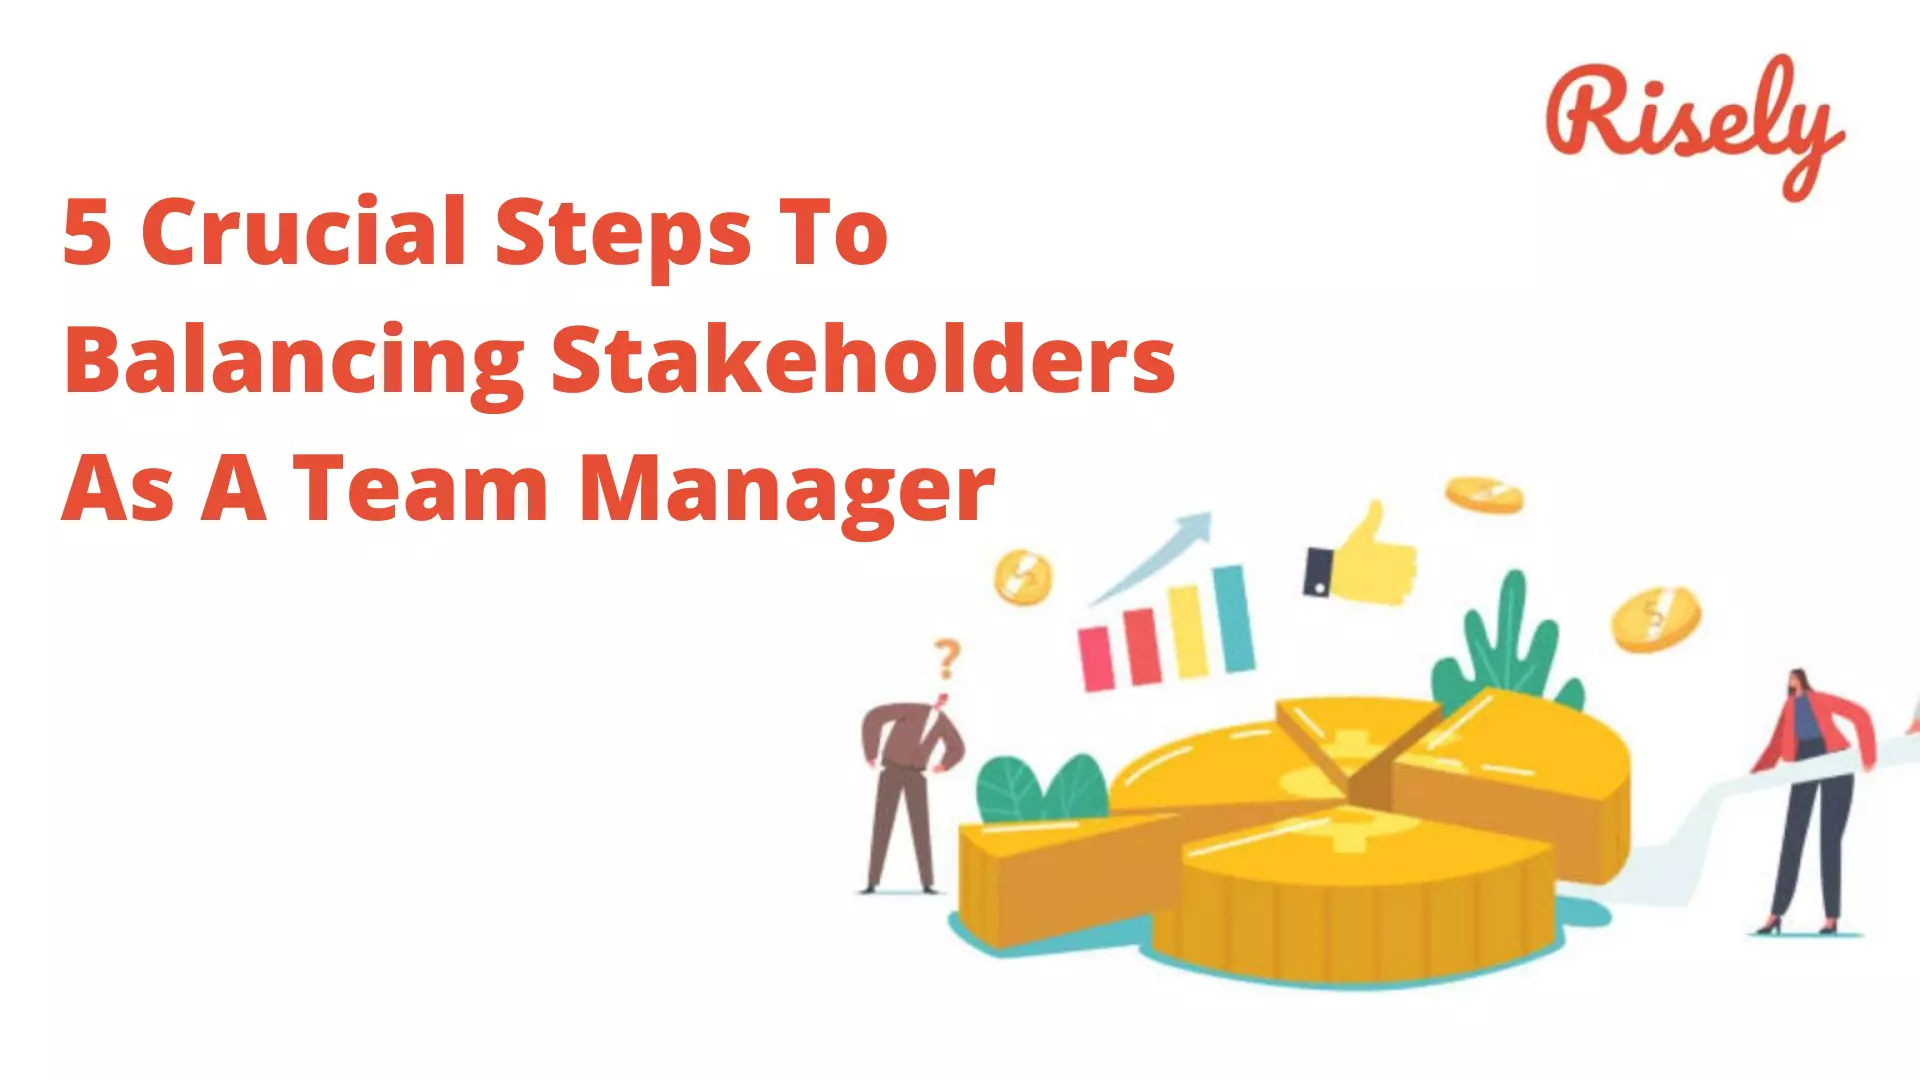 5 Crucial Steps To Balancing Stakeholders As A Team Manager